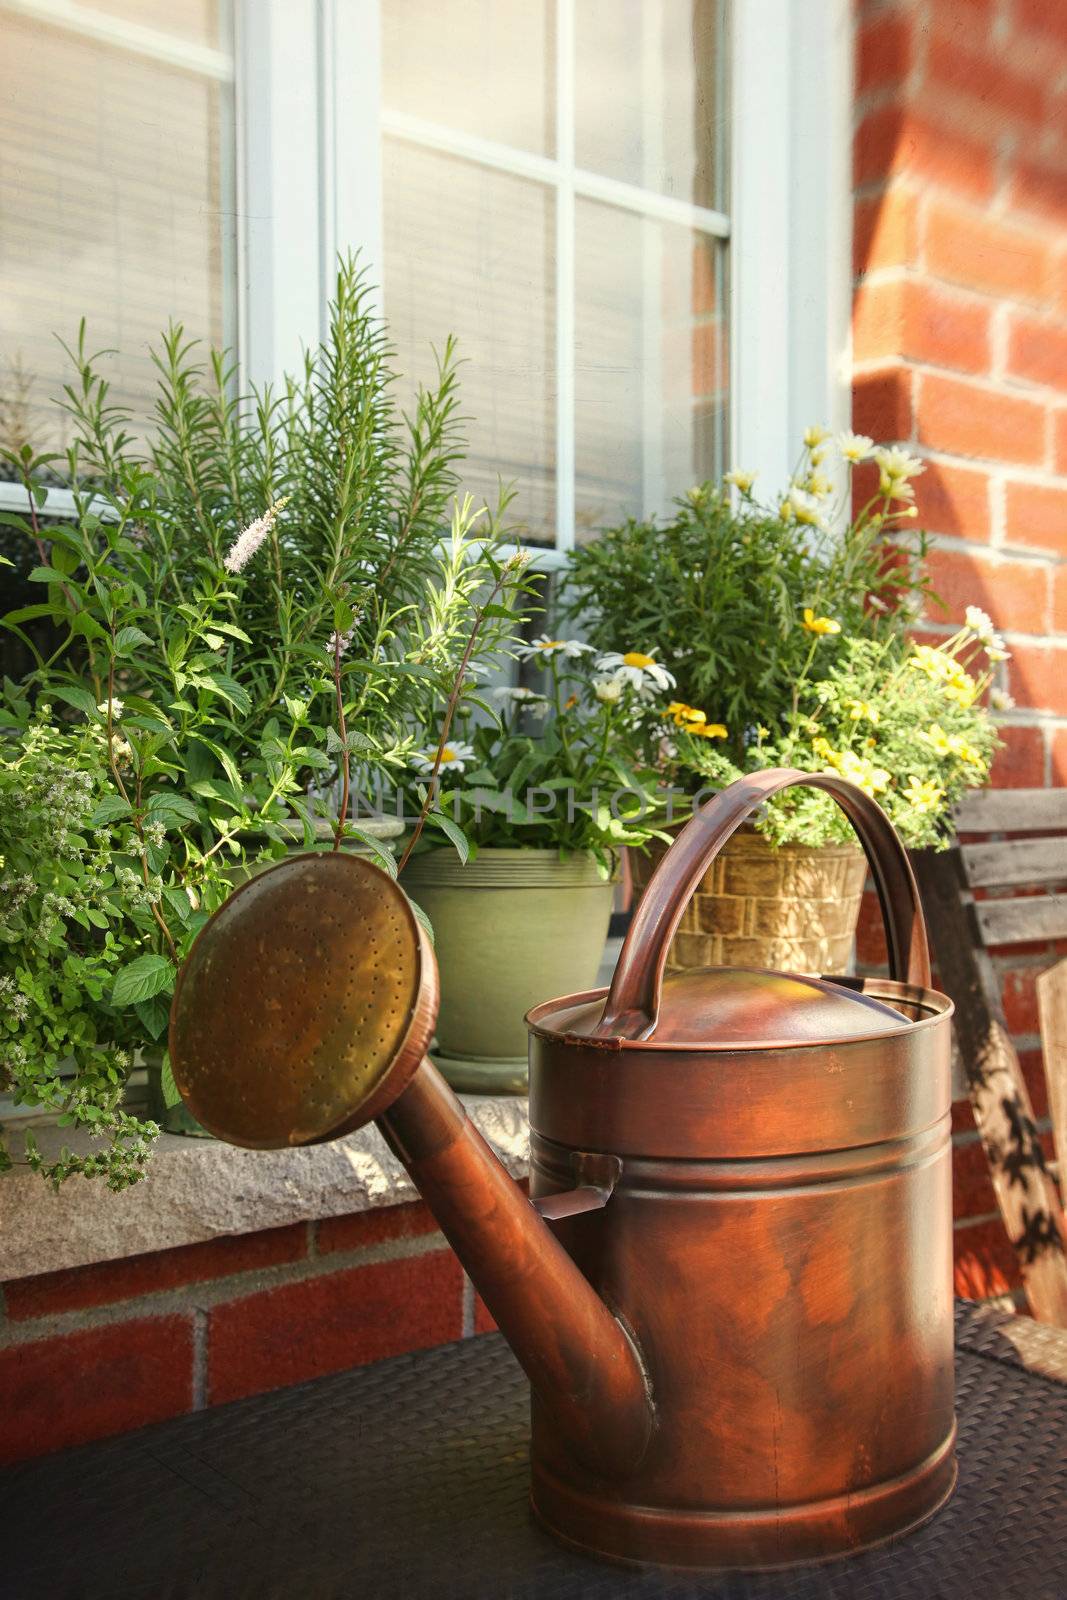 Pots of flowers and herbs on window ledge